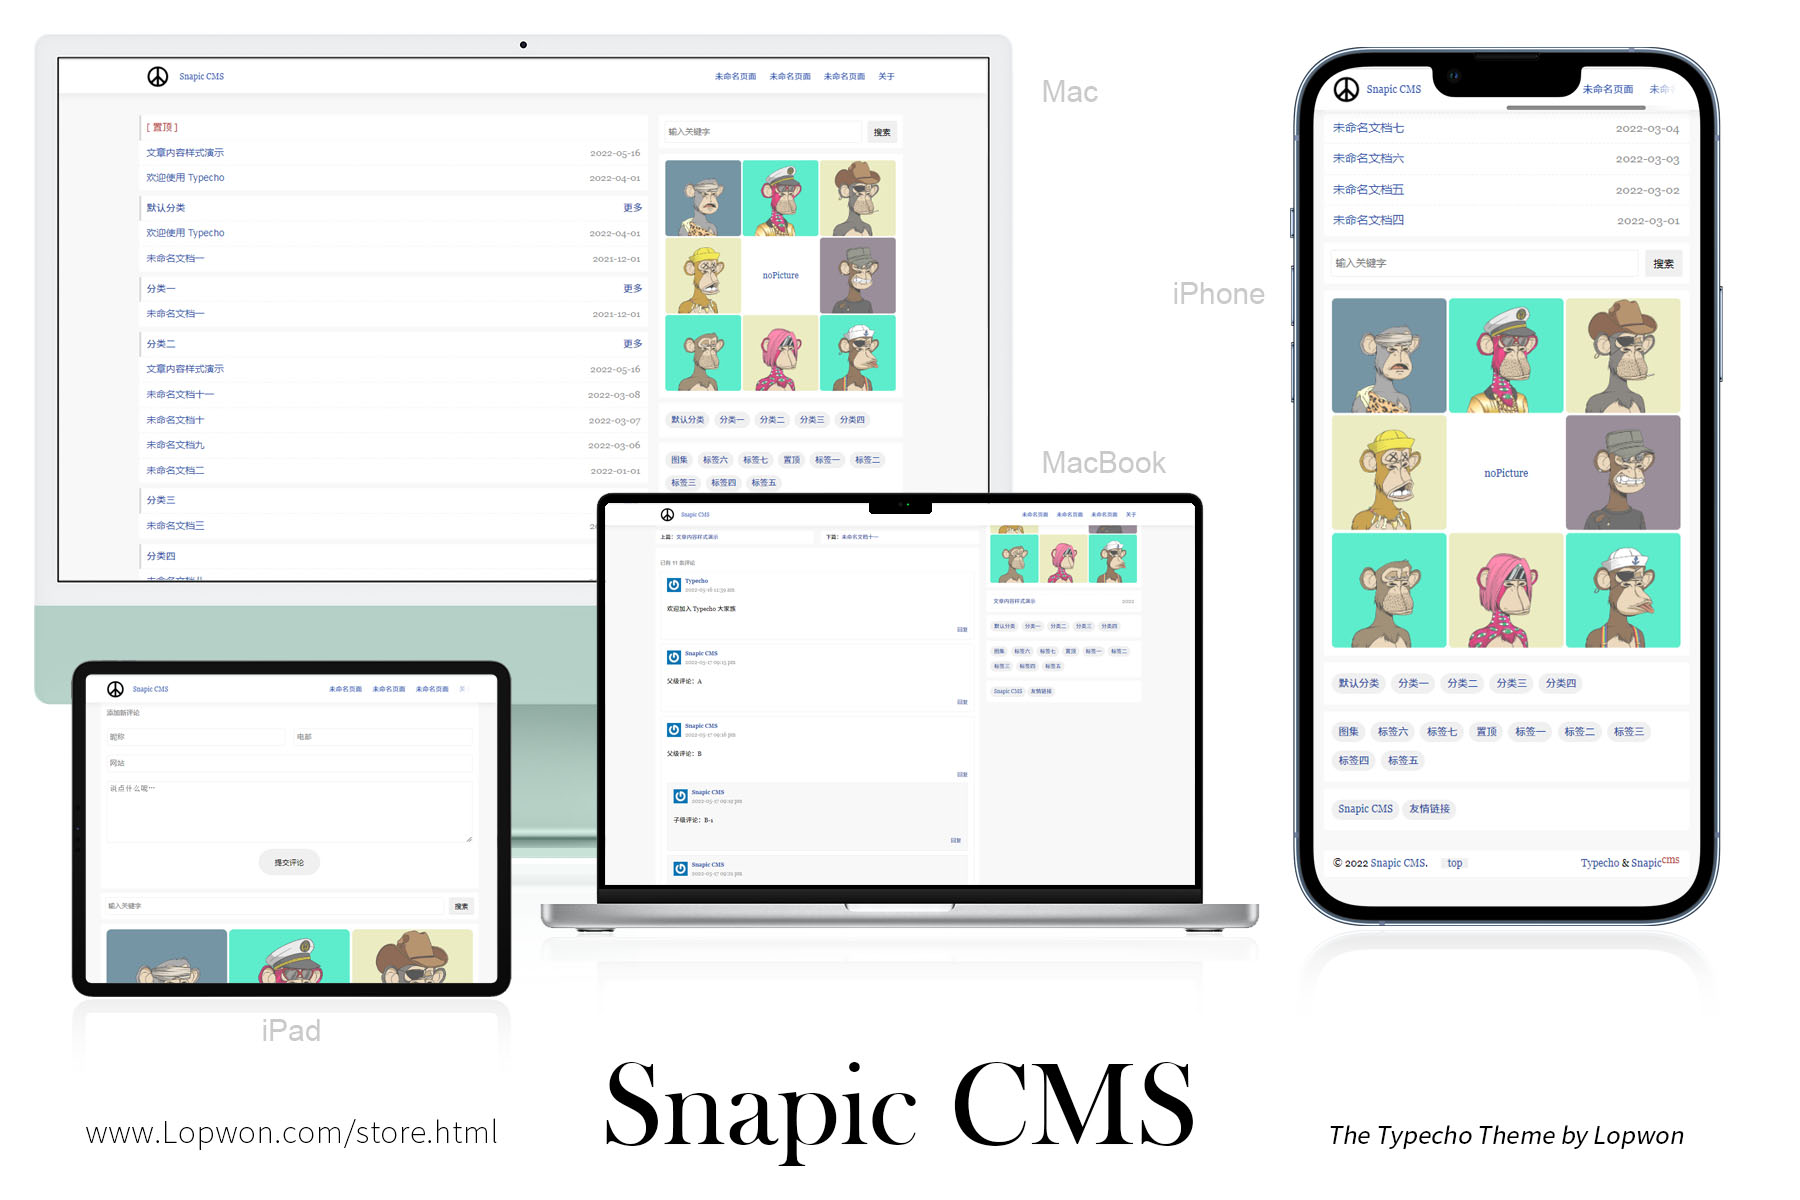 Snapic CMS 使用文档